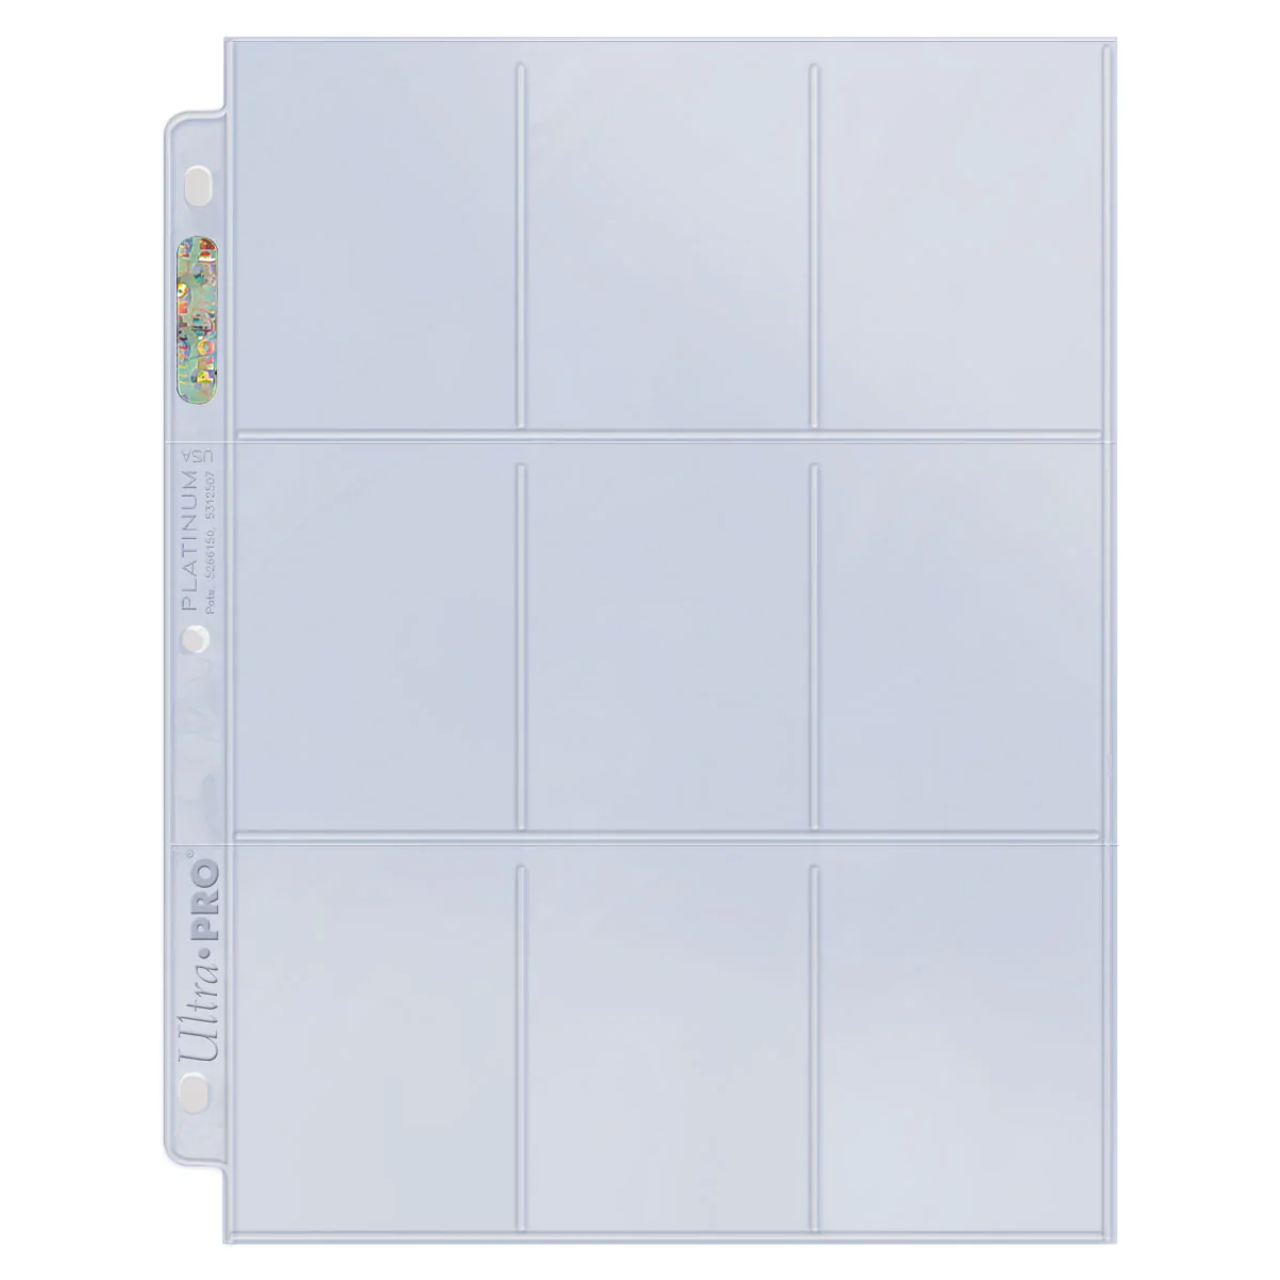 Ultra Pro Platinum Series 9-Pocket Pages 100ct Box / Case of 10